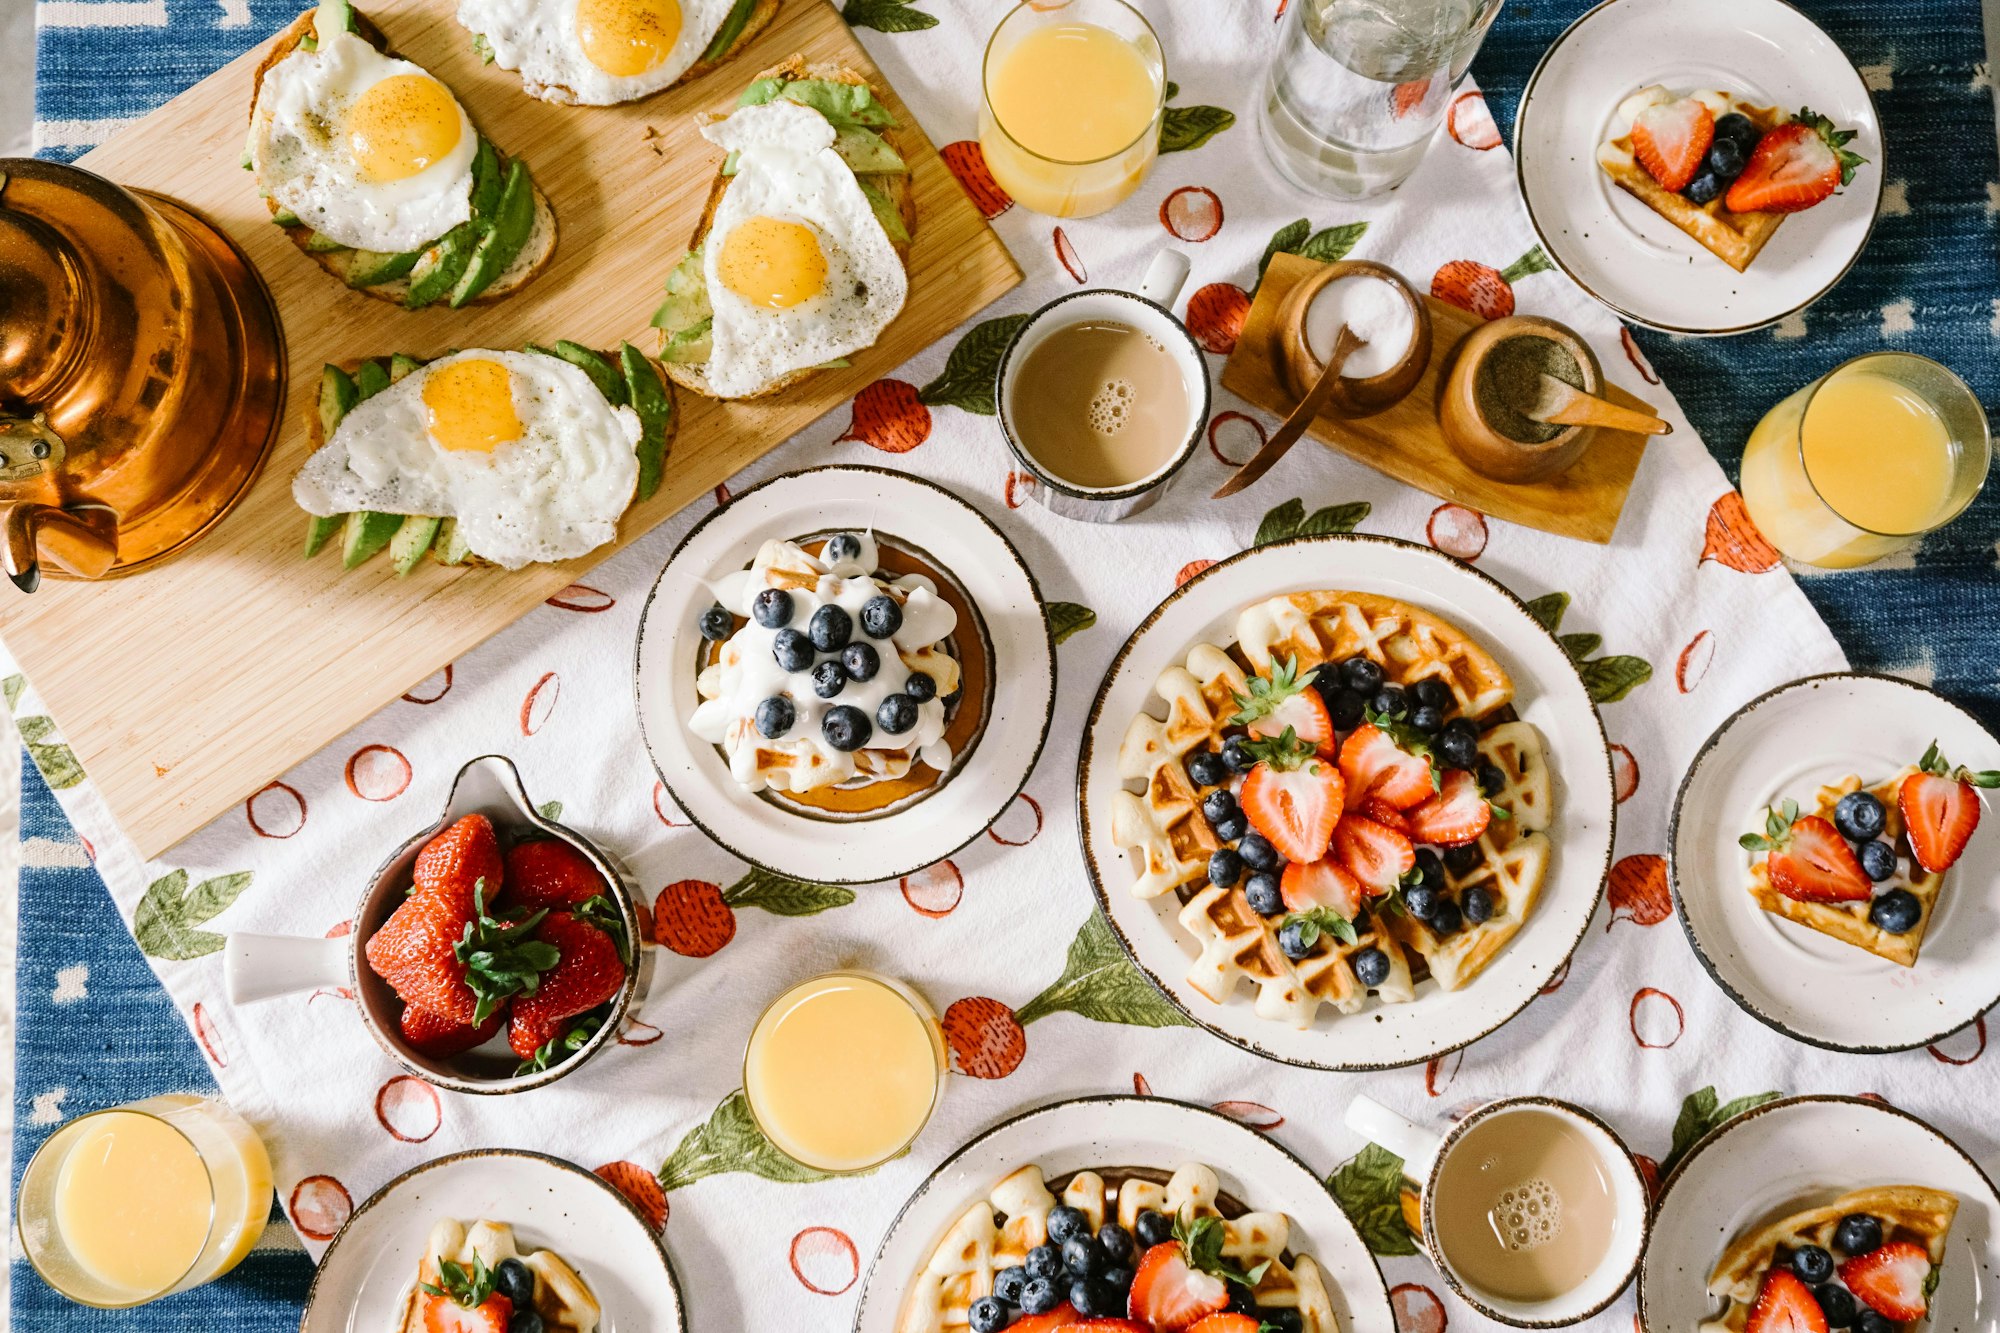 A brunch spread with waffles, pancakes, and eggs Benedict.